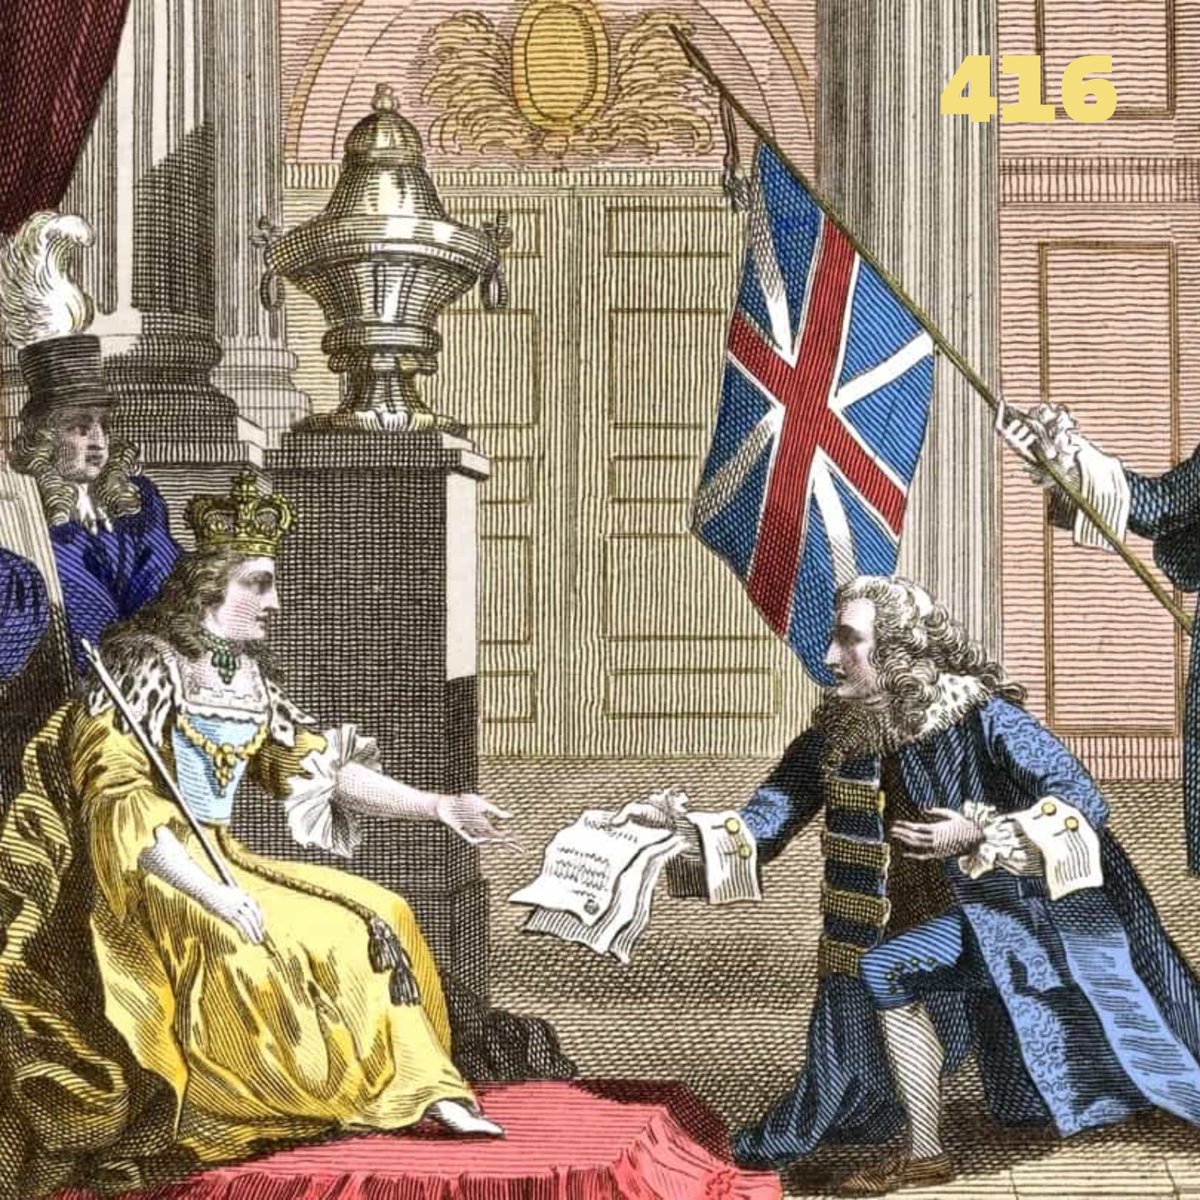 On May 1, 1707, The Act of Union came into force, turning England and Scotland into the Kingdom of Great Britain. Today also marks 416 days since Cllr Sarah Warren said she wanted a healthy debate on LTNs and how we get around in Bath. No meeting of minds so far.